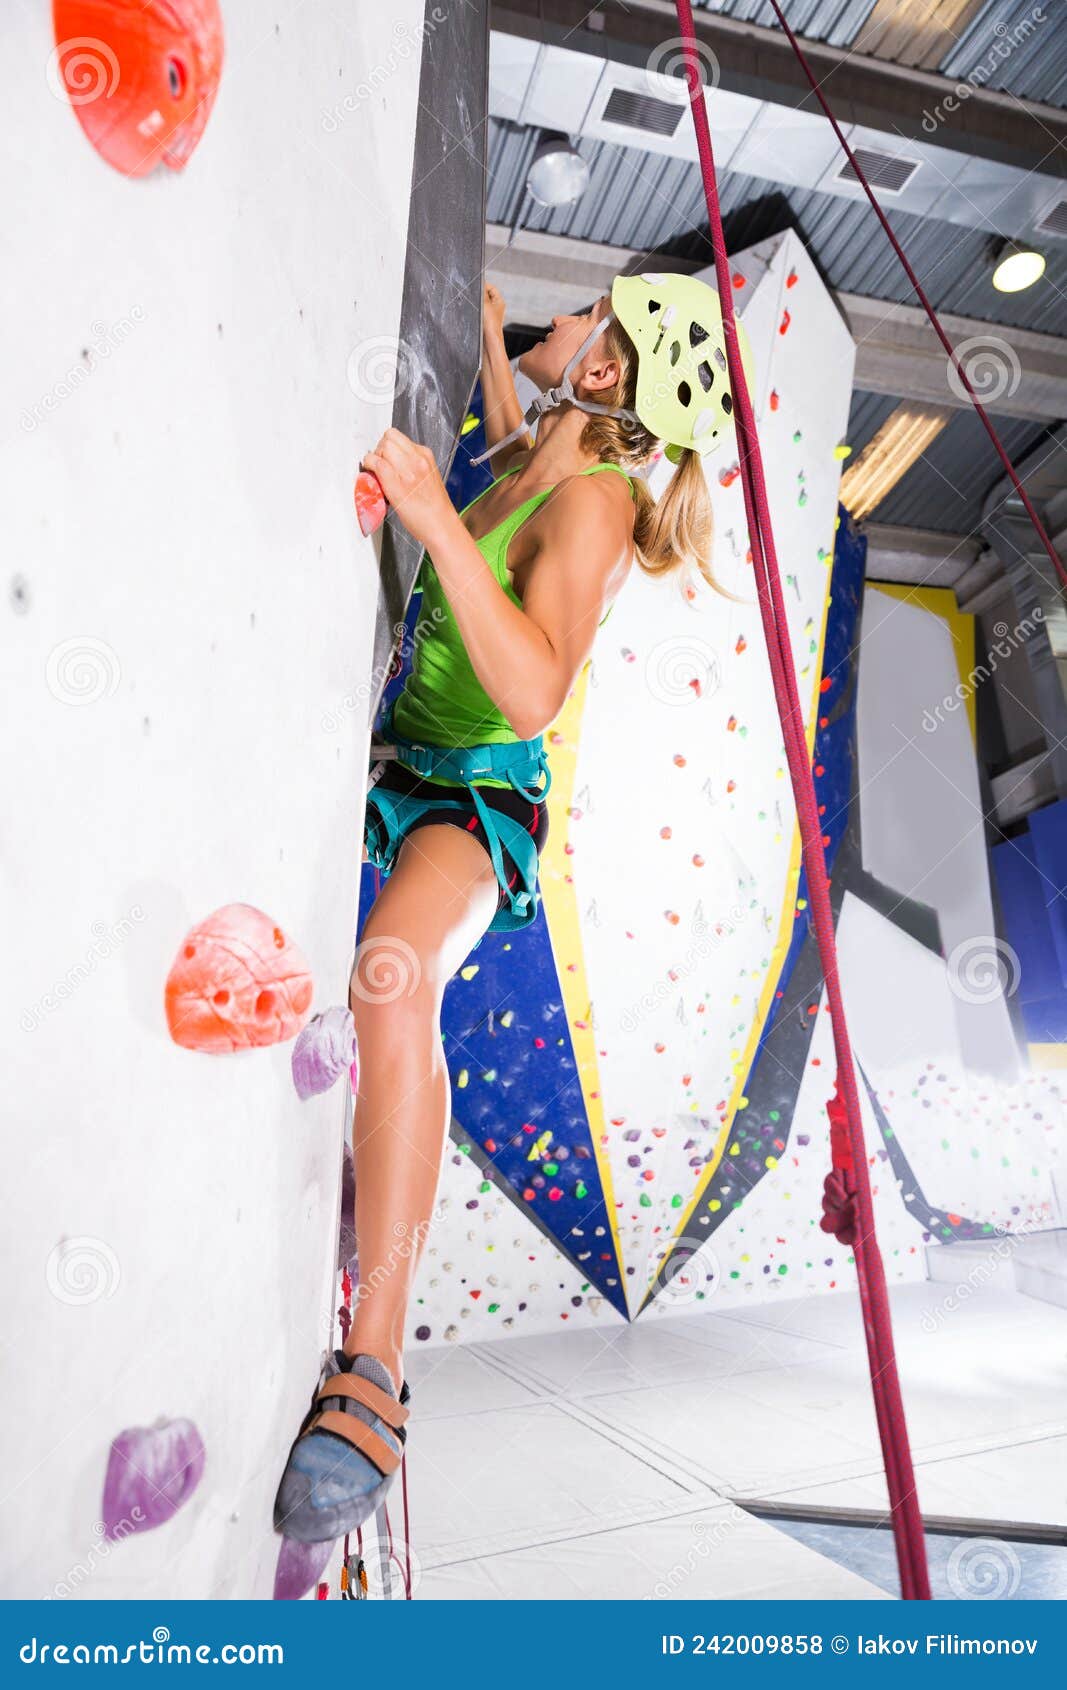 Sporty Young Woman Dressed In Rock Climbing Outfit Training At Bouldering  Gym Stock Photo, Picture and Royalty Free Image. Image 106758331.